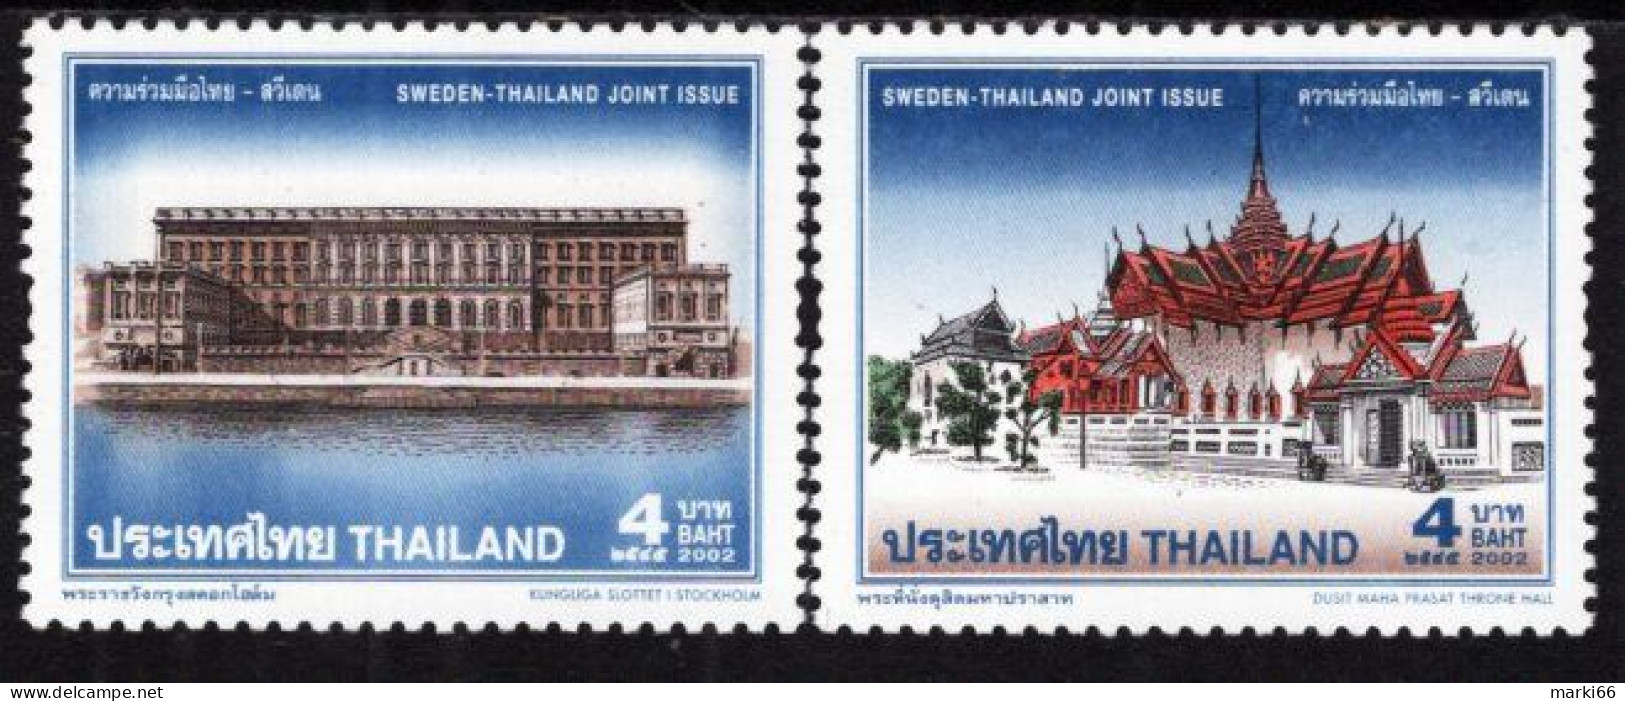 Thailand - 2002 - Traditional Architecture - Joint Issue With Sweden - Mint Stamp Set - Thailand